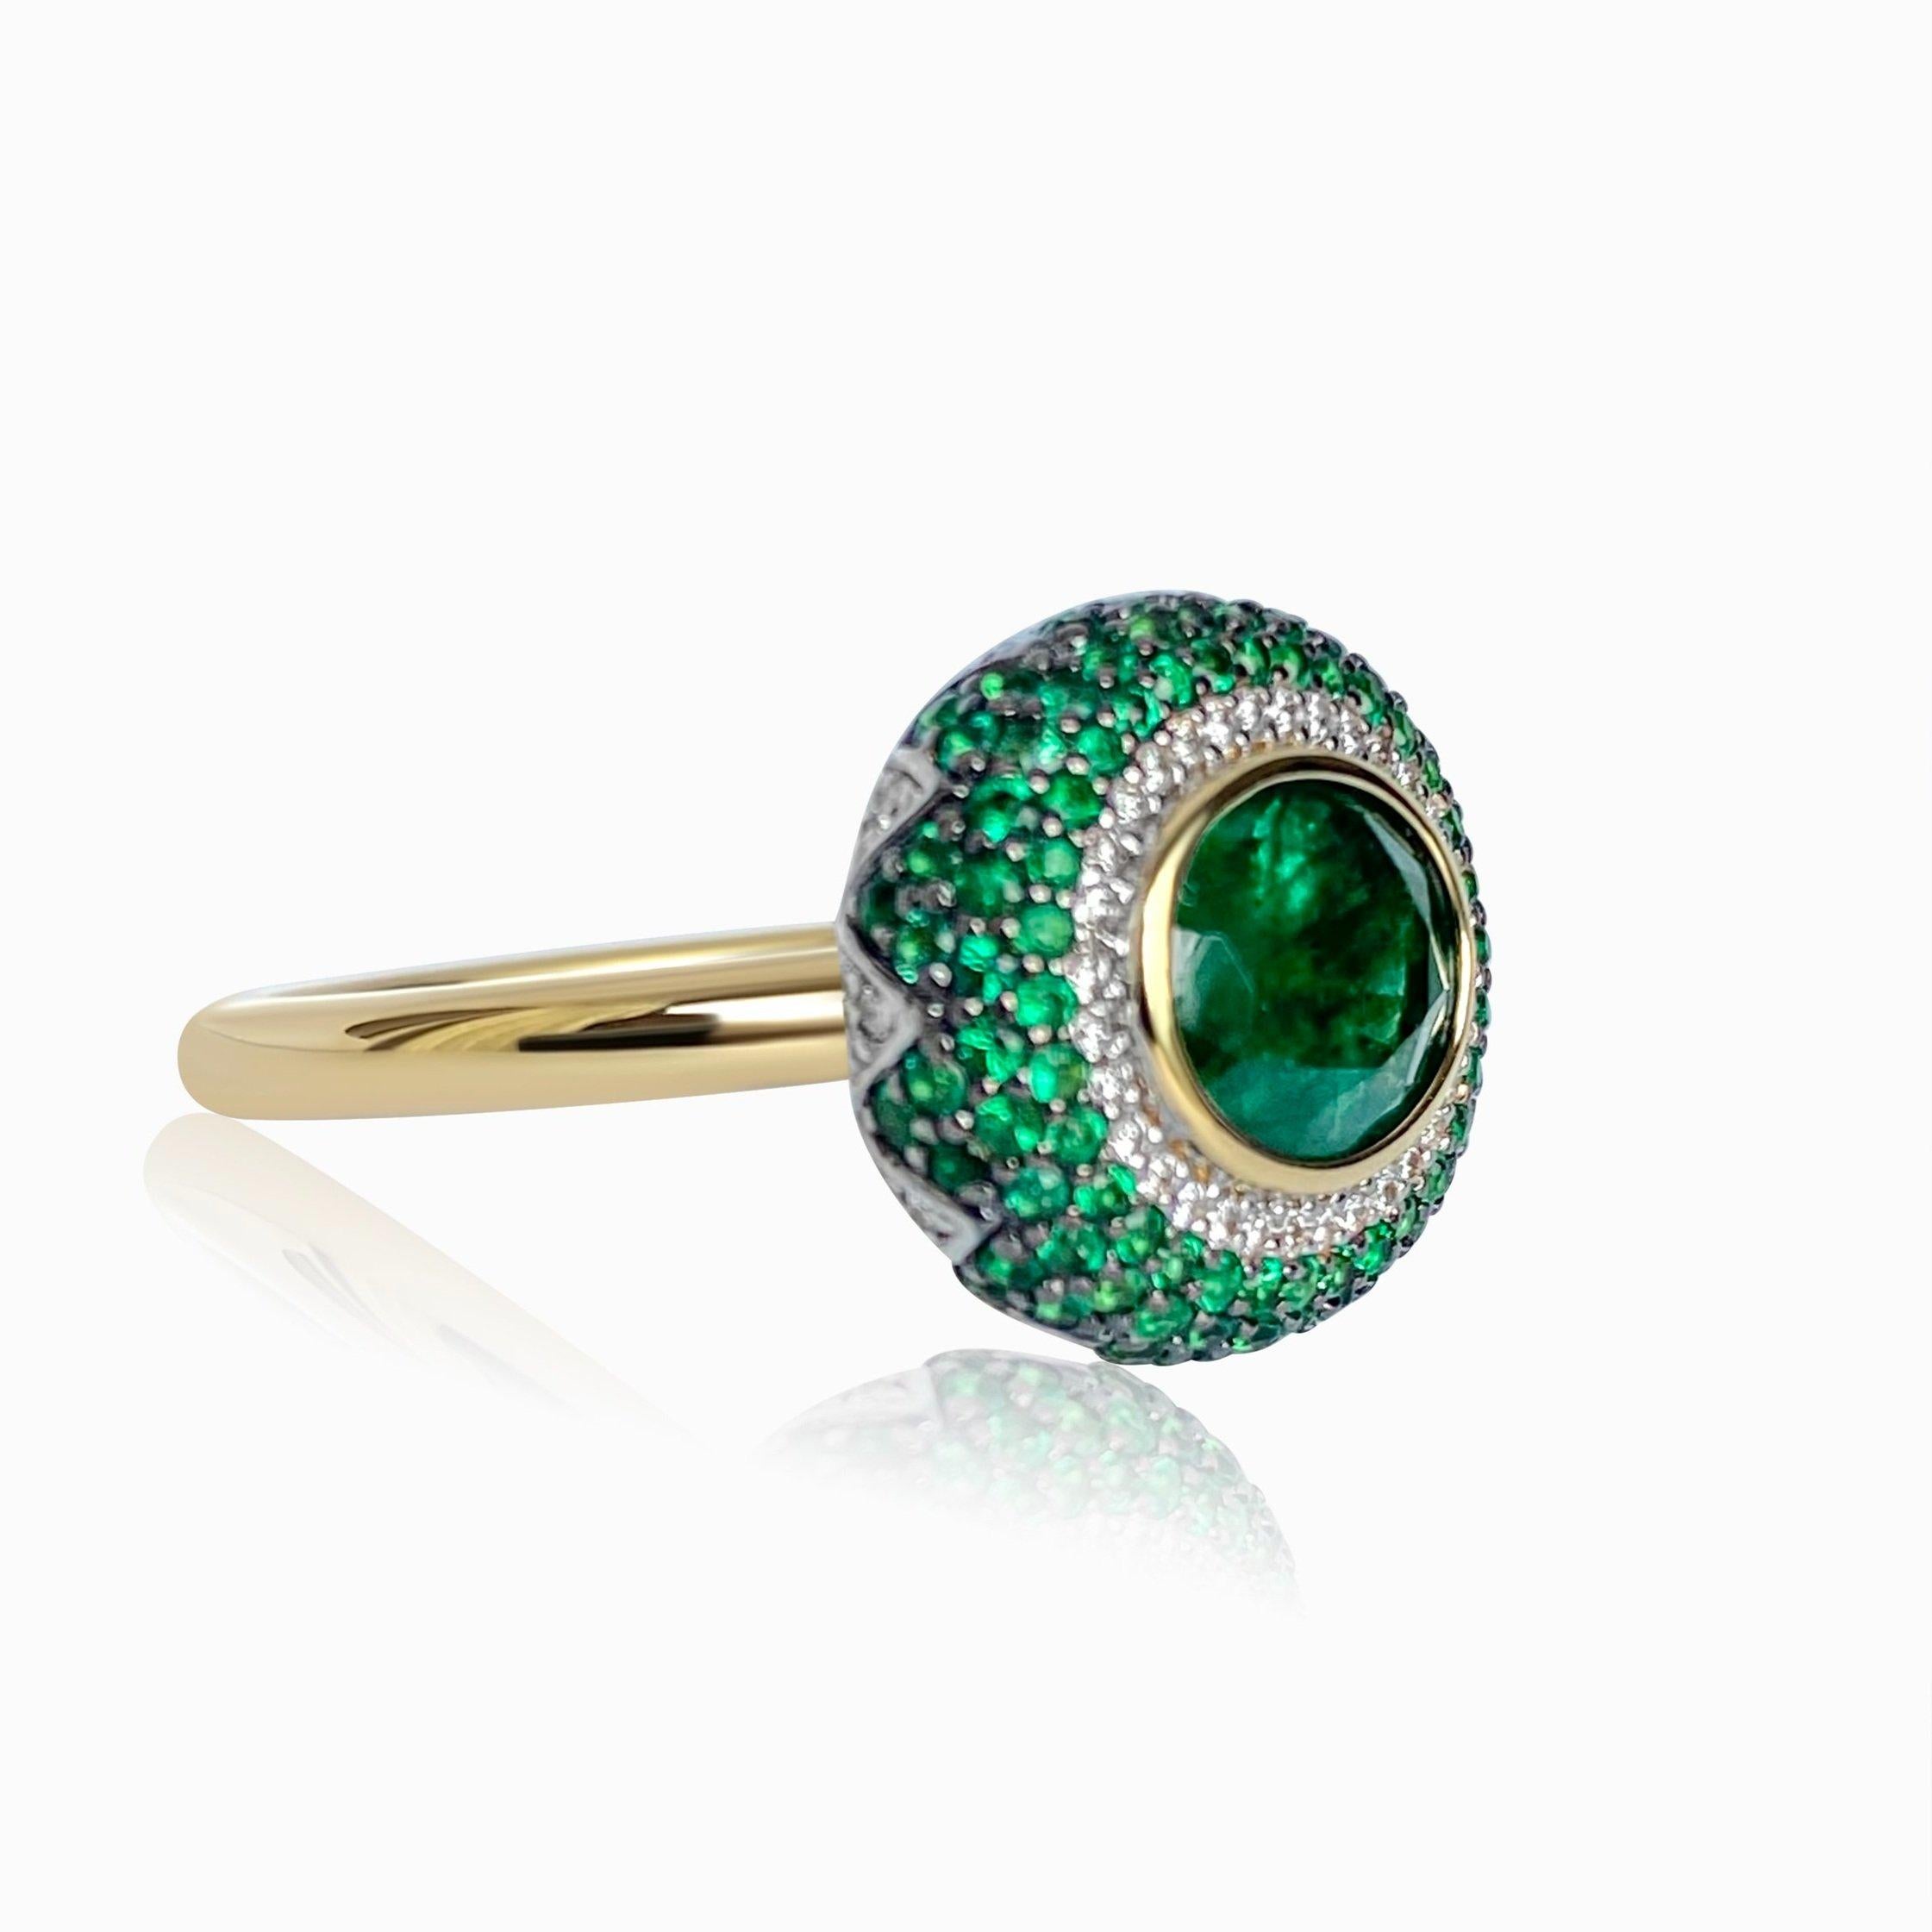 14k Yellow Gold. These any-finger rings include a dazzling OVAL-shaped emerald solitaire of approximately 2cts, pave set emerald petals in a lotus motif, and pave set brilliant cut white diamonds. Rinoor's re-imagined rings, are incredibly versatile